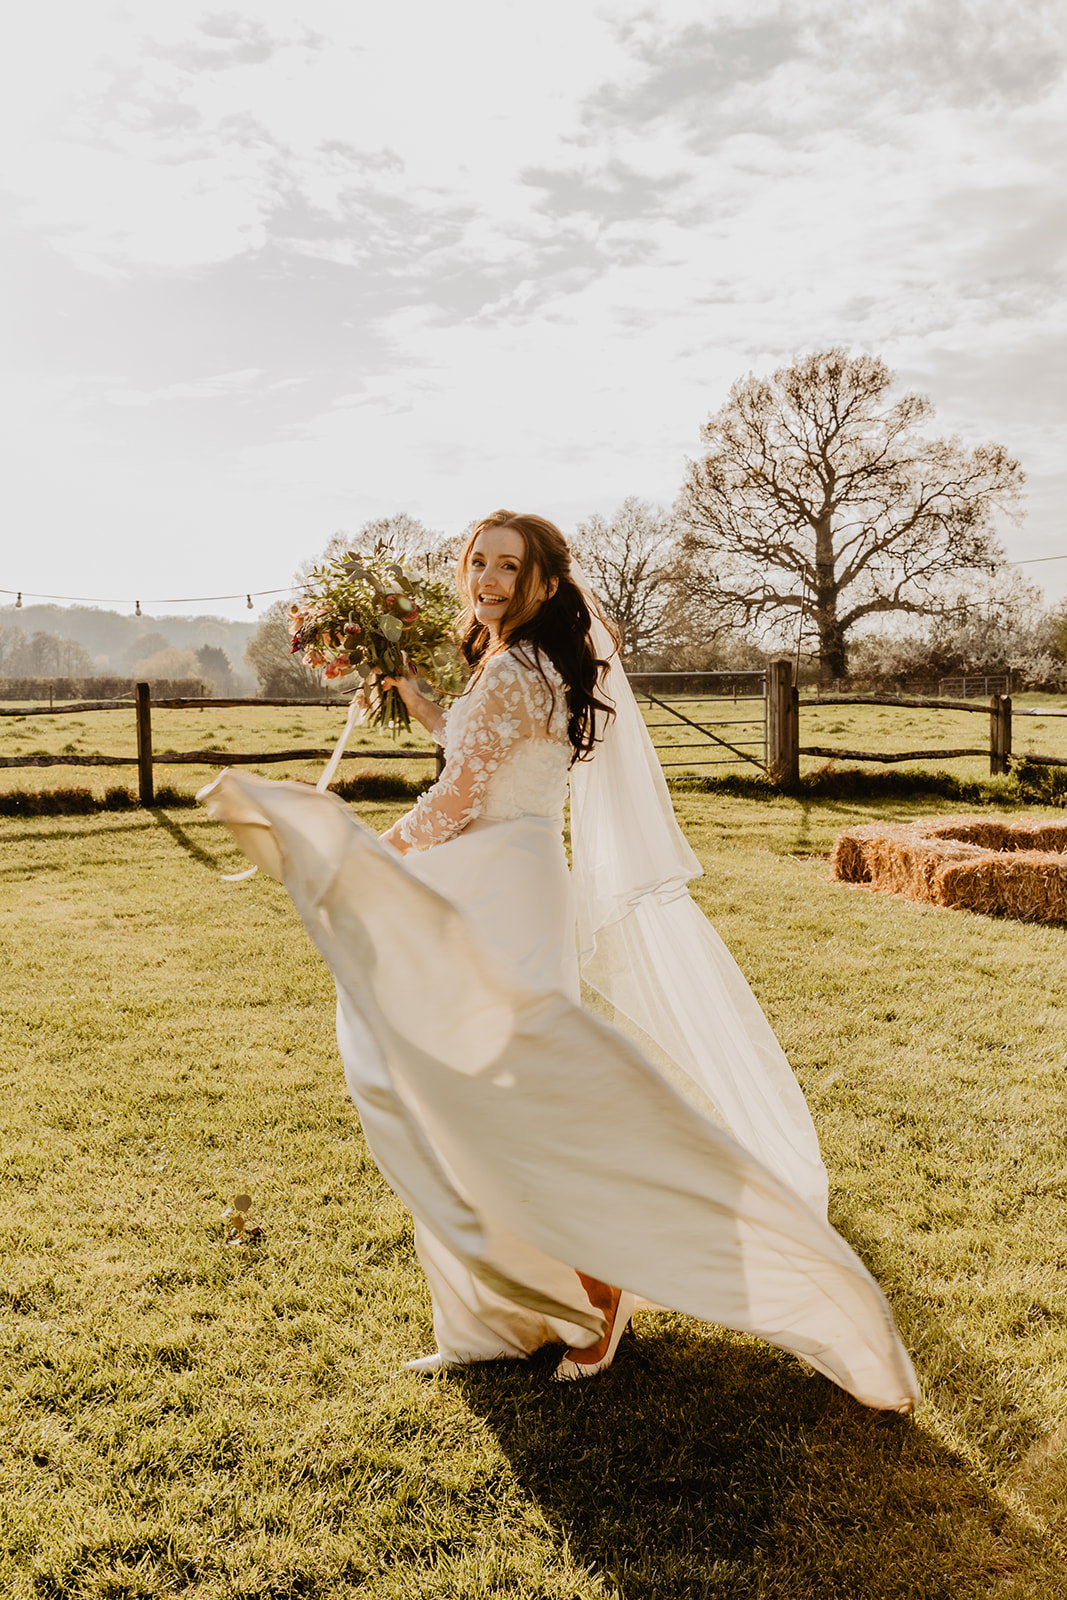 Bride at a Secret Barn Wedding, West Sussex. By Olive Joy Photography